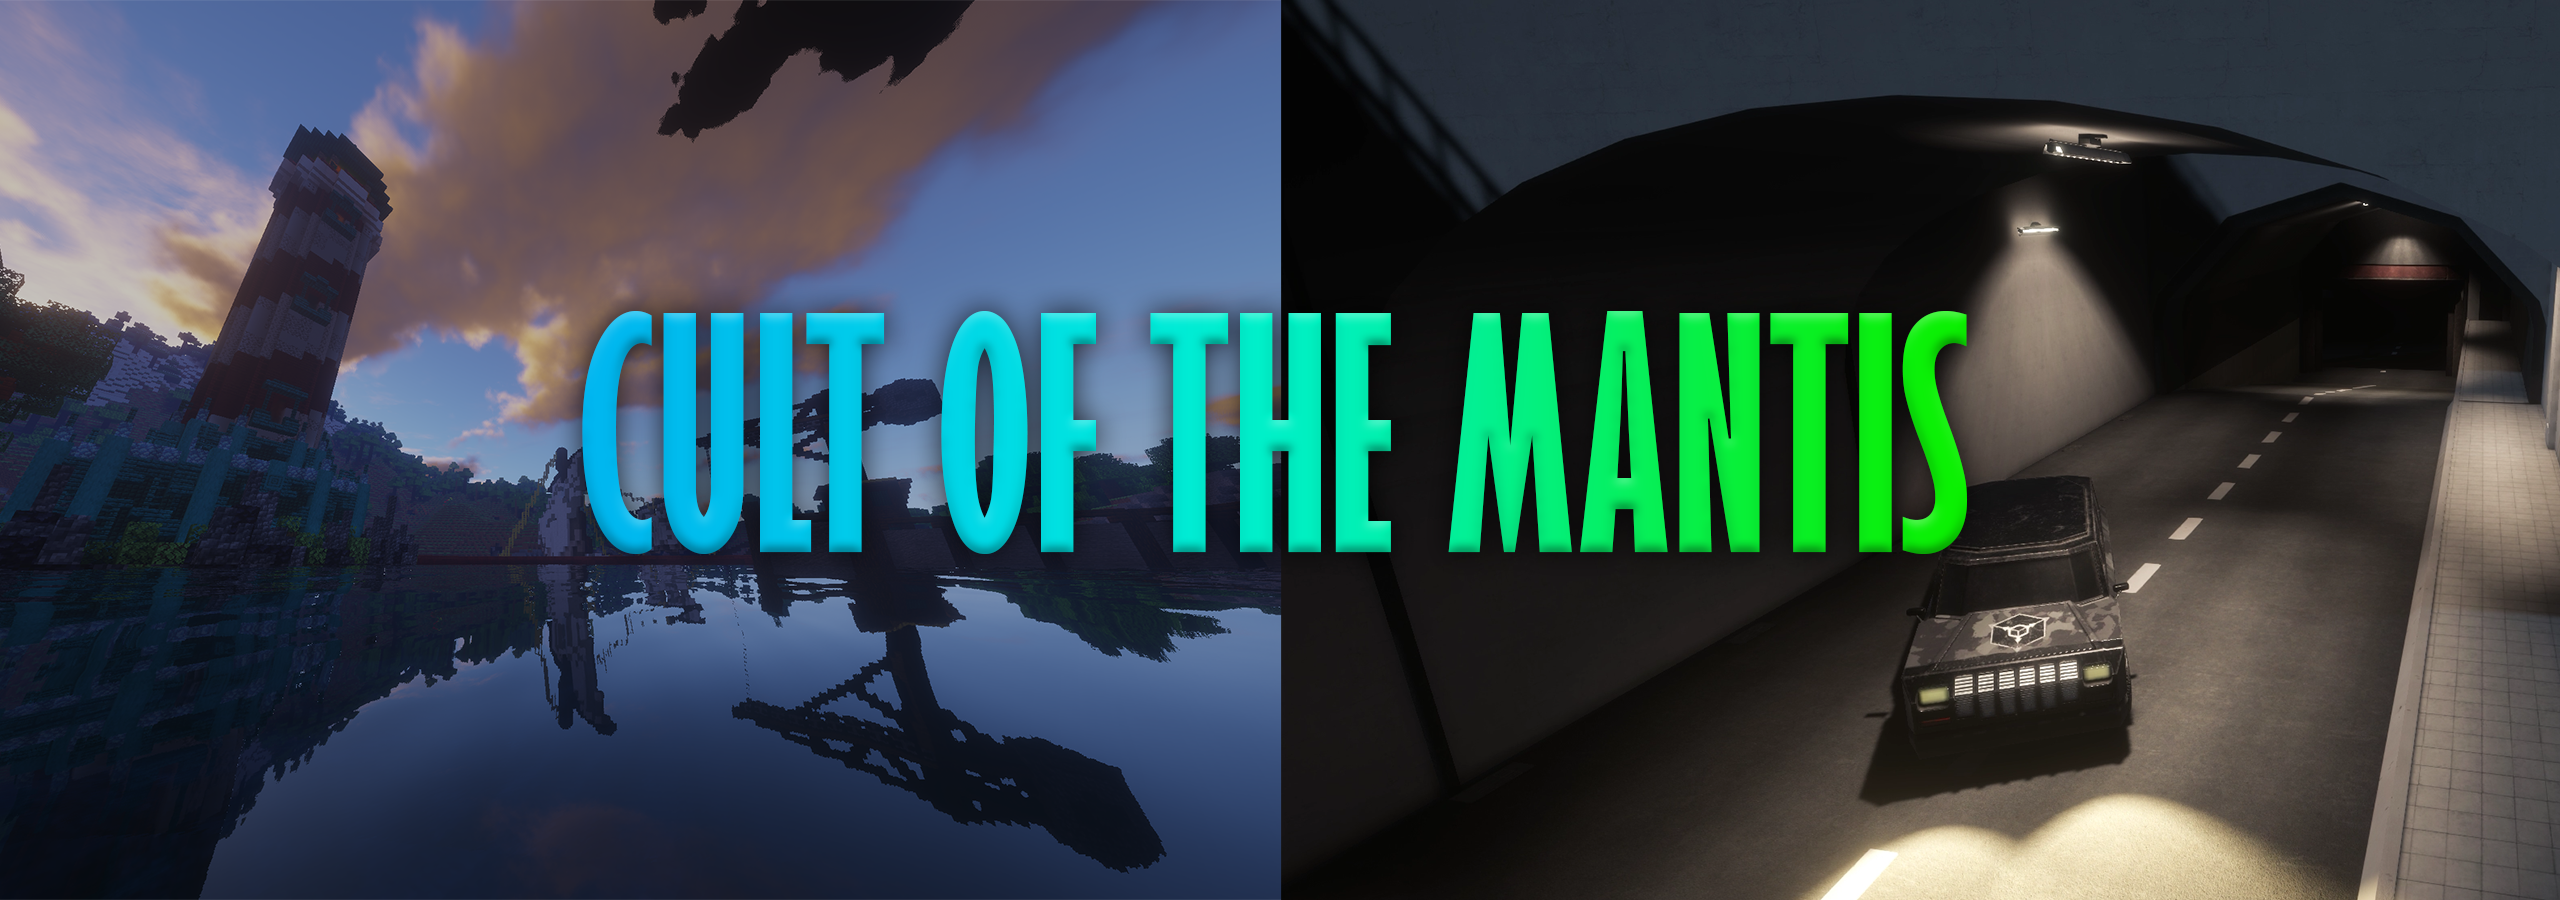 Forums for Cult of the Mantis